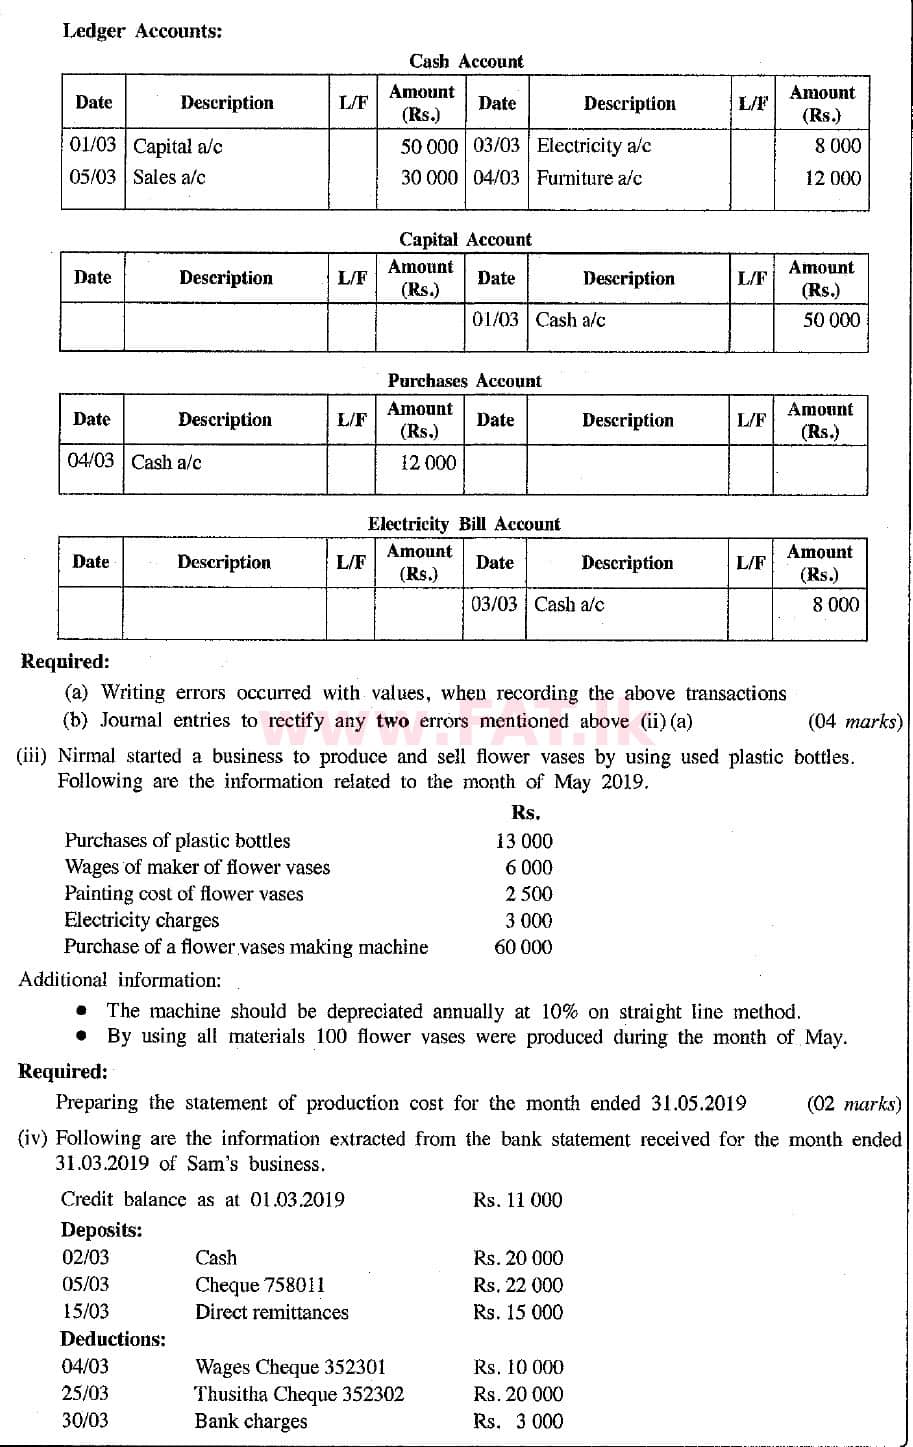 National Syllabus : Ordinary Level (O/L) Business and Accounting Studies - 2019 March - Paper II (English Medium) 6 2